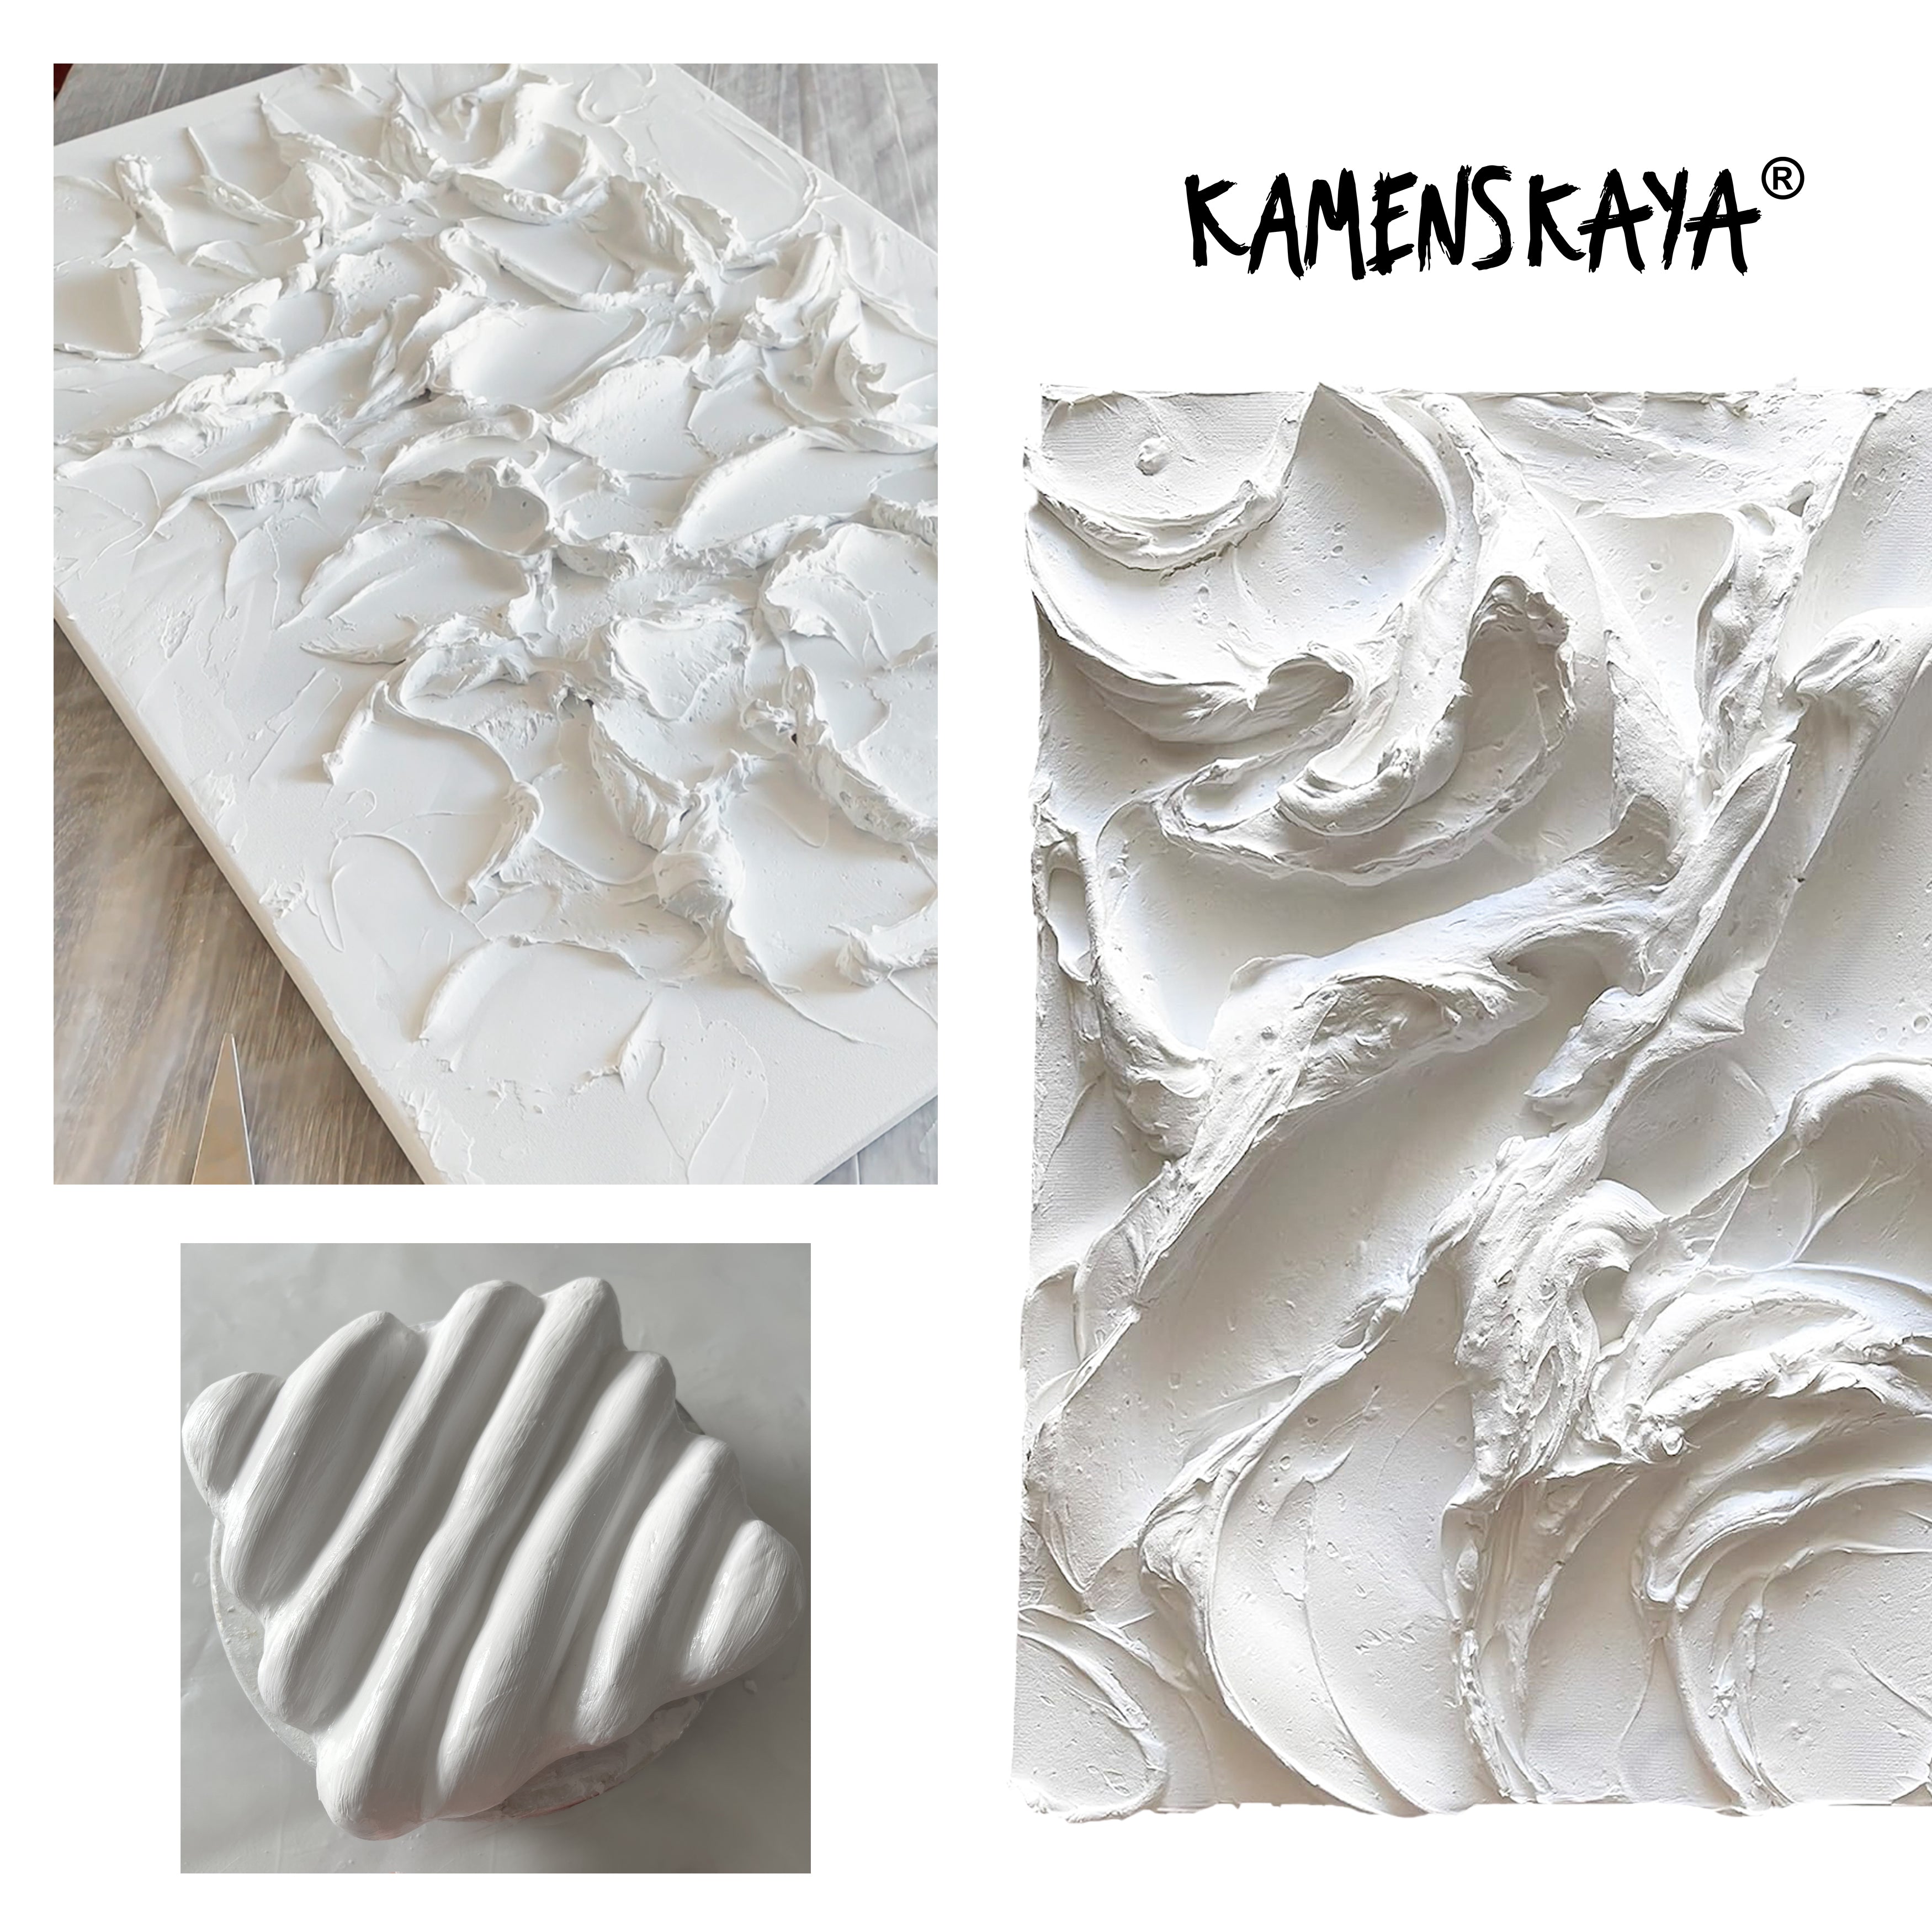 Fluffy Texture Paste, White Thick Paint, White Thick Paste, Thick Paste,  Thick Paint, White Medium Paste, Embossing Paste, Molding Paste, 